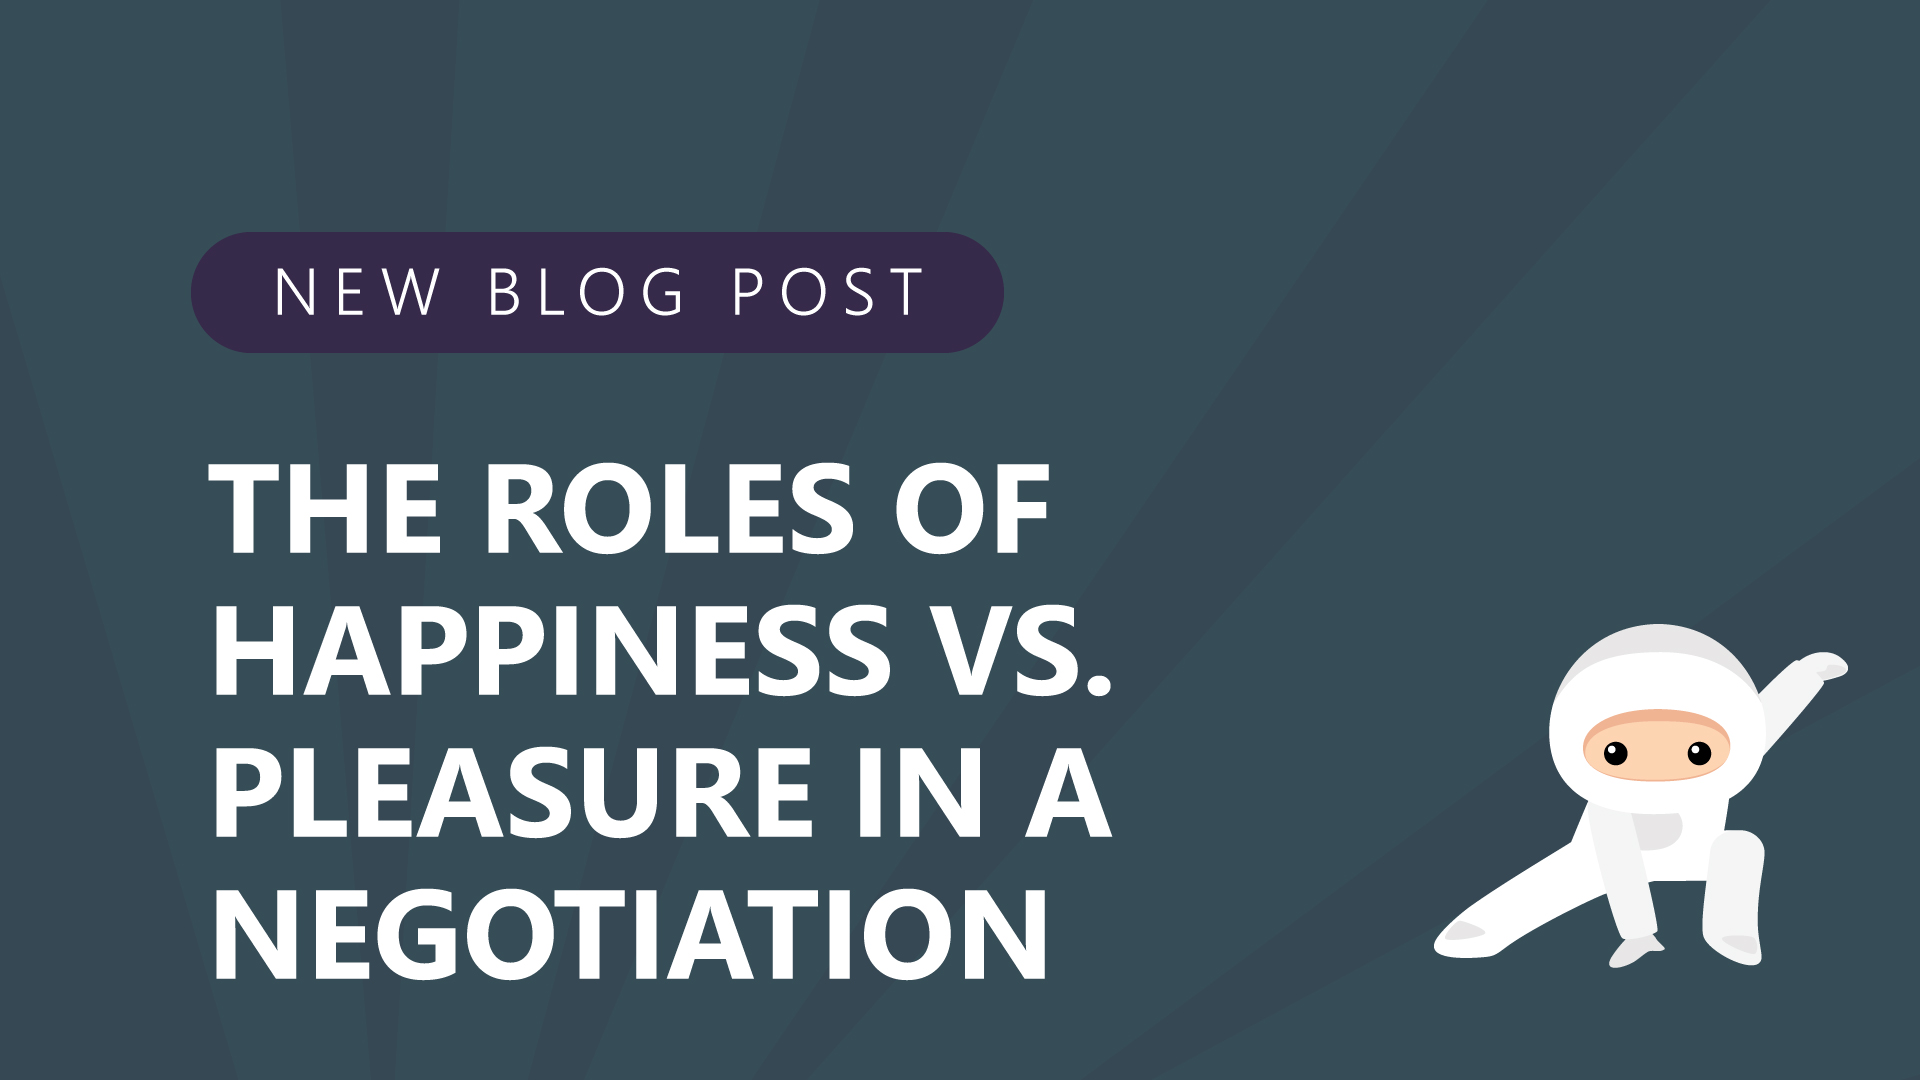 32-The-Roles-of-Happiness-vs.-Pleasure-in-a-Negotiation.jpg